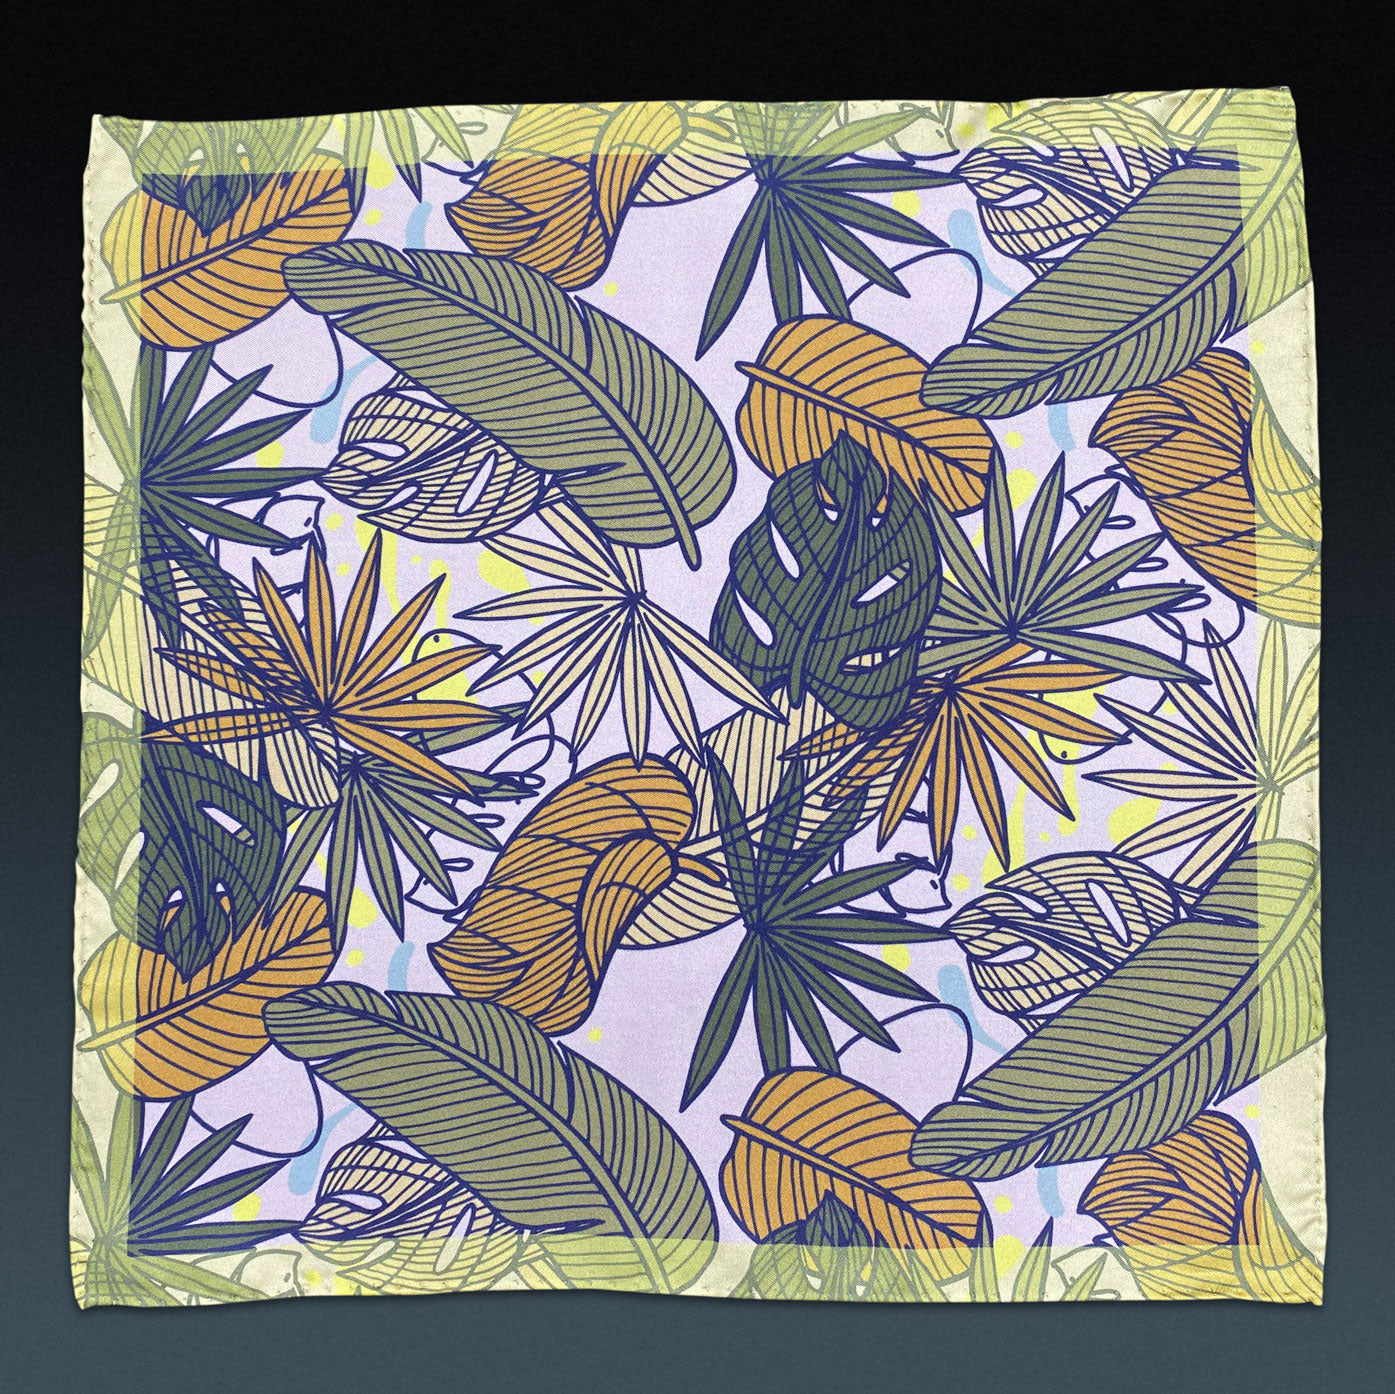 Fully unfolded 'Avon' silk pocket square, showing the stylised leaf montage in various shades of green and yellow, framed with a lime border.